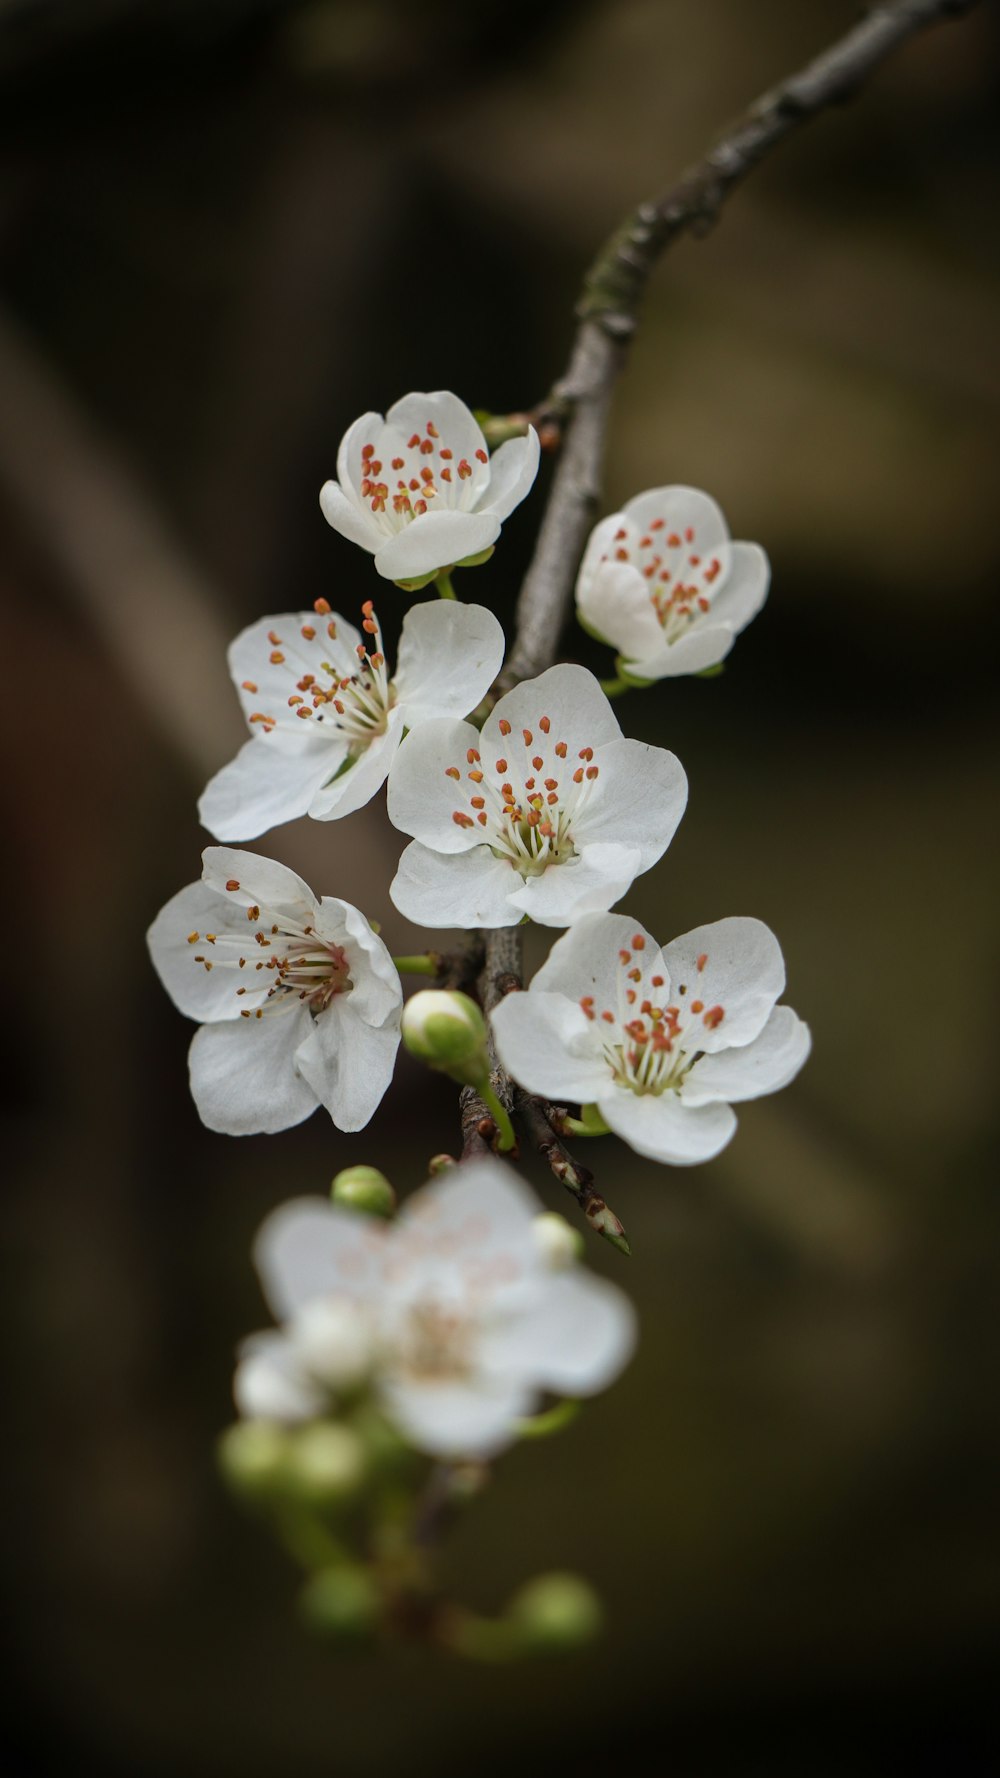 a close up of some white flowers on a tree